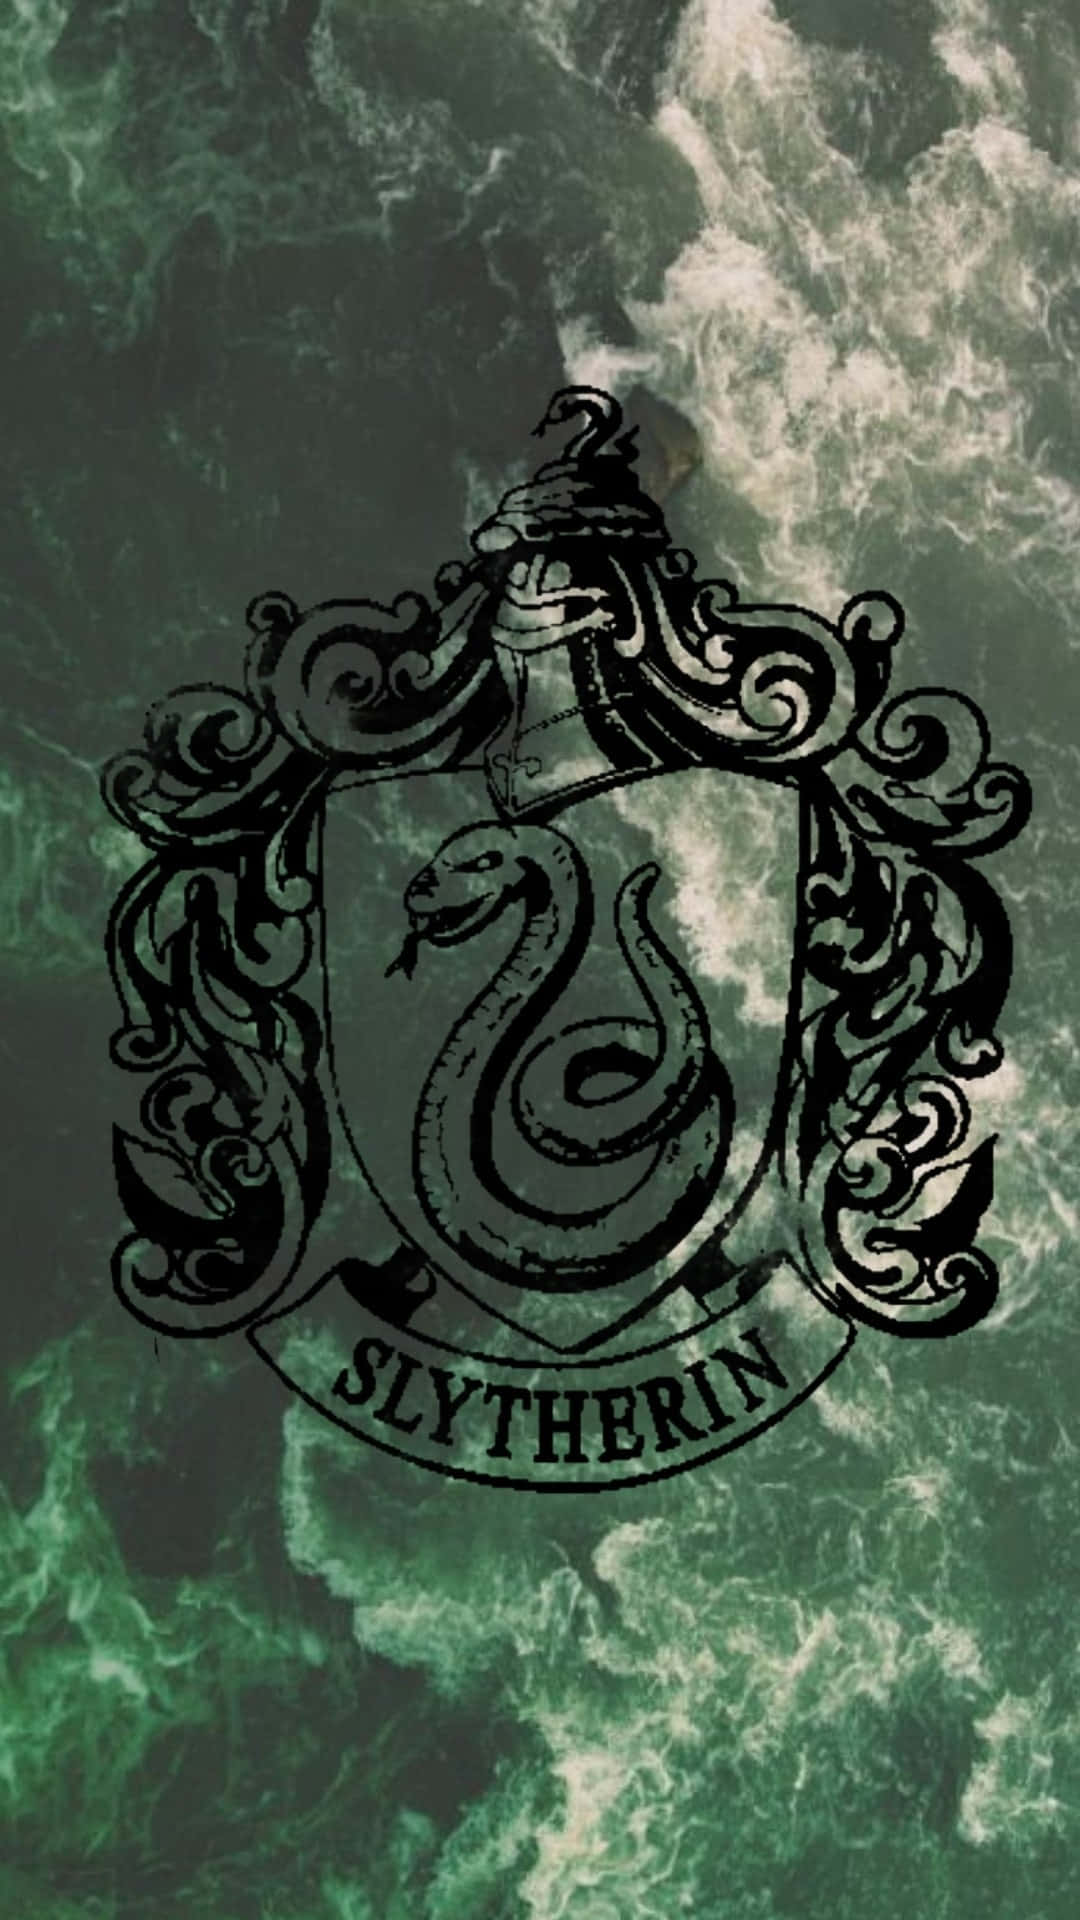 A mysterious and powerful aesthetic emanating from the depths of Slytherin House